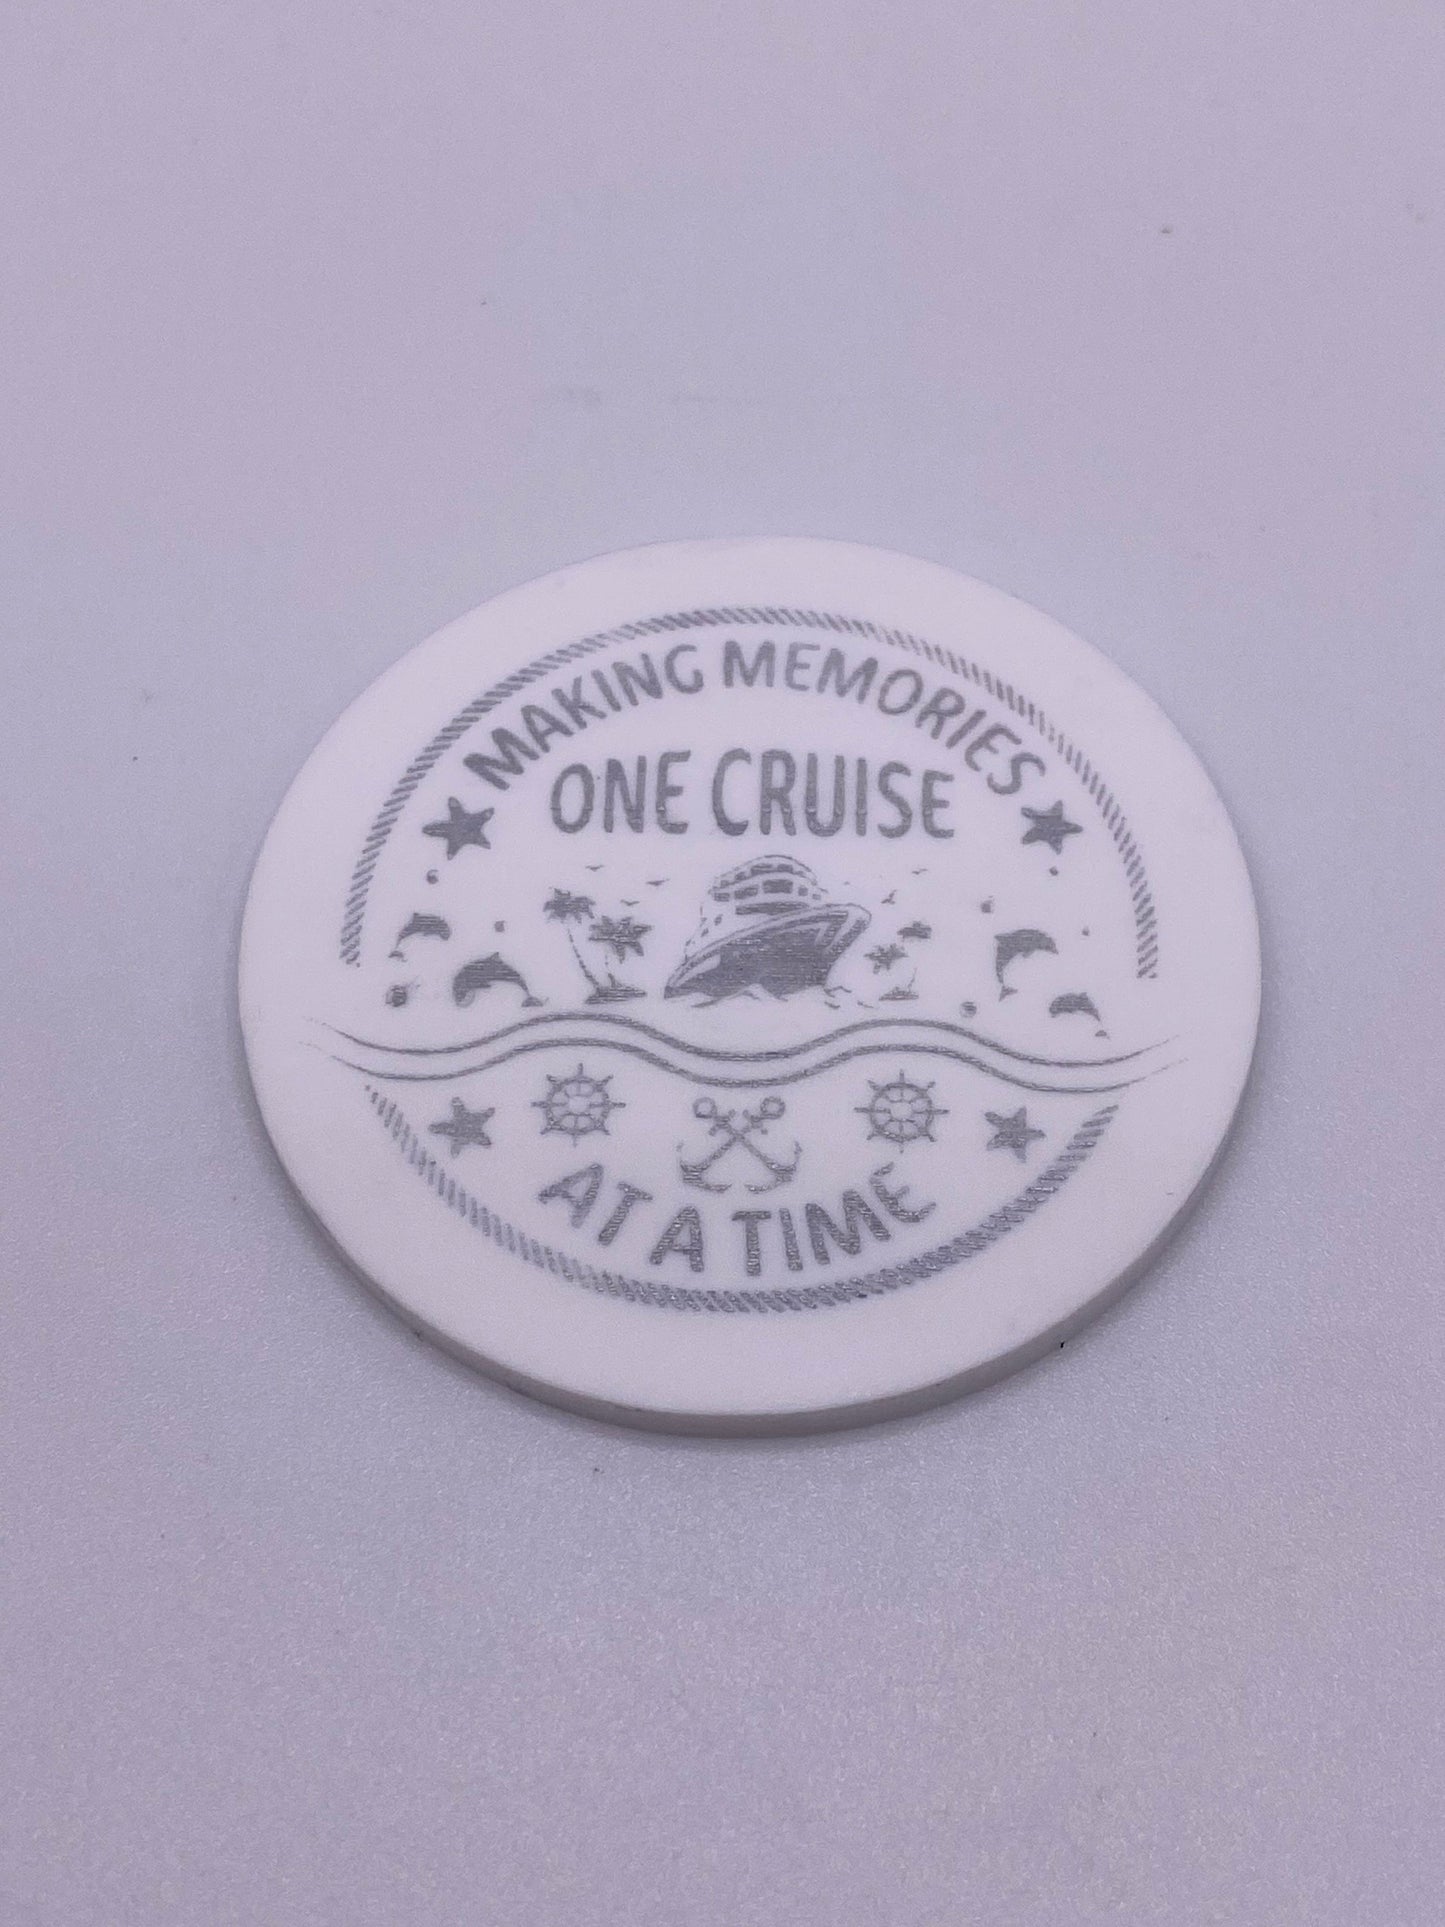 Making memories - one cruise at a time - Creative Designs By Kari